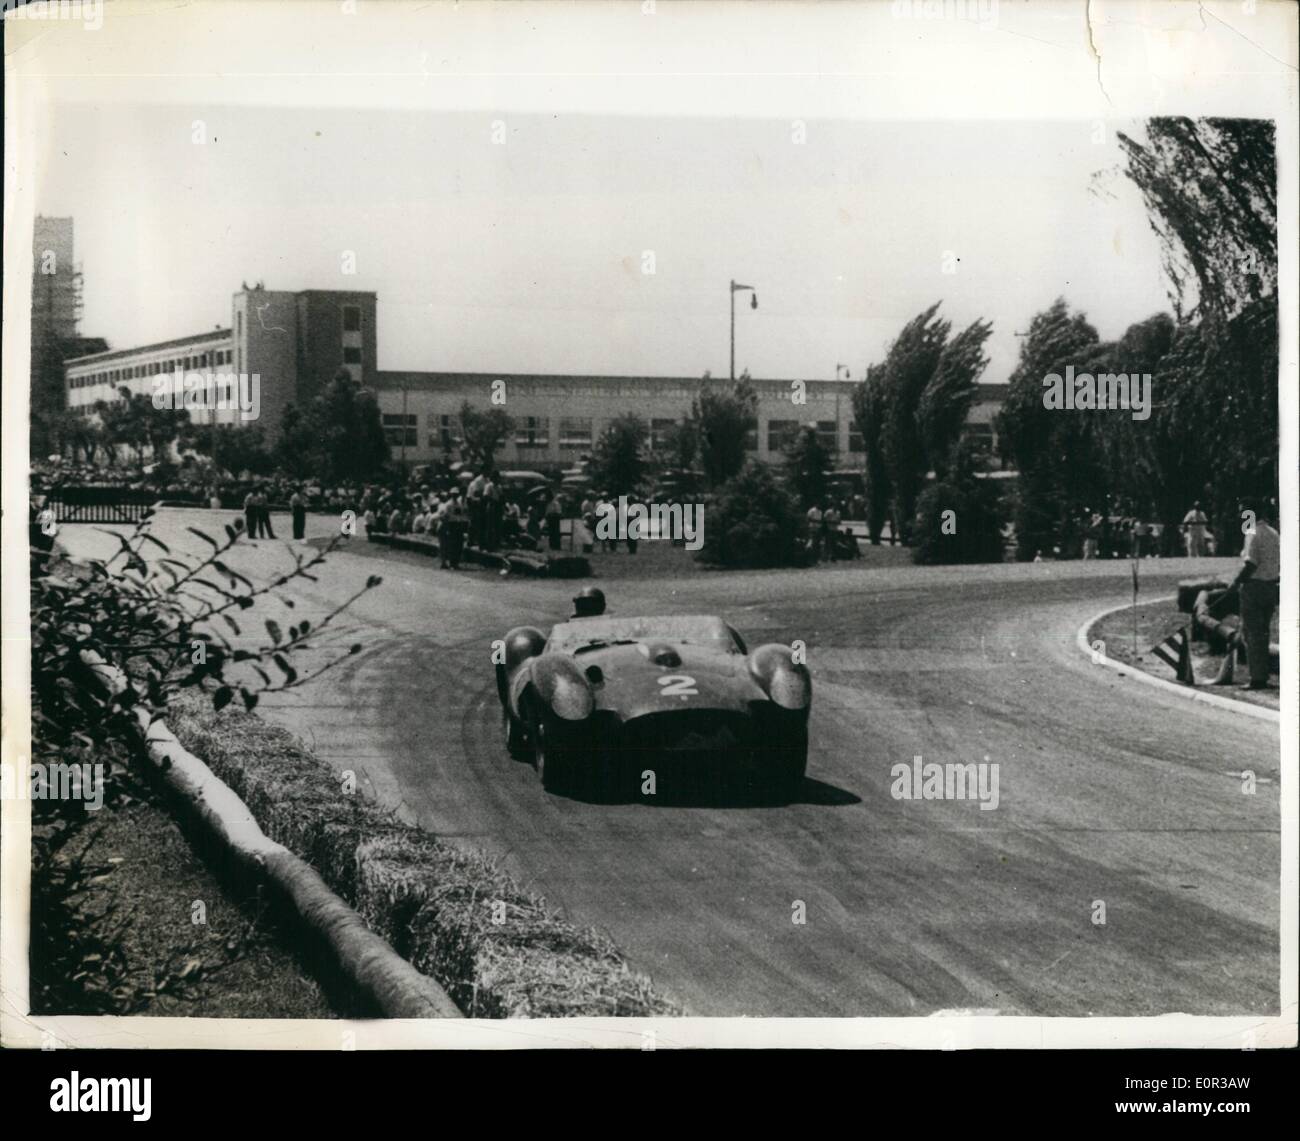 Jan. 01, 1958 - Peter Collins wins Buenos aires sports car race driving a Ferrari: British driver Peter Collins won the sports Car event - during the recent Buenos Aires Grans Prix - driving a Ferrari... Mike Hawthorn, also in a Ferrari took second place.. Photo shows Peter Collins in his Ferrari nearing the end of his victorious race in Buanos Aires. Stock Photo